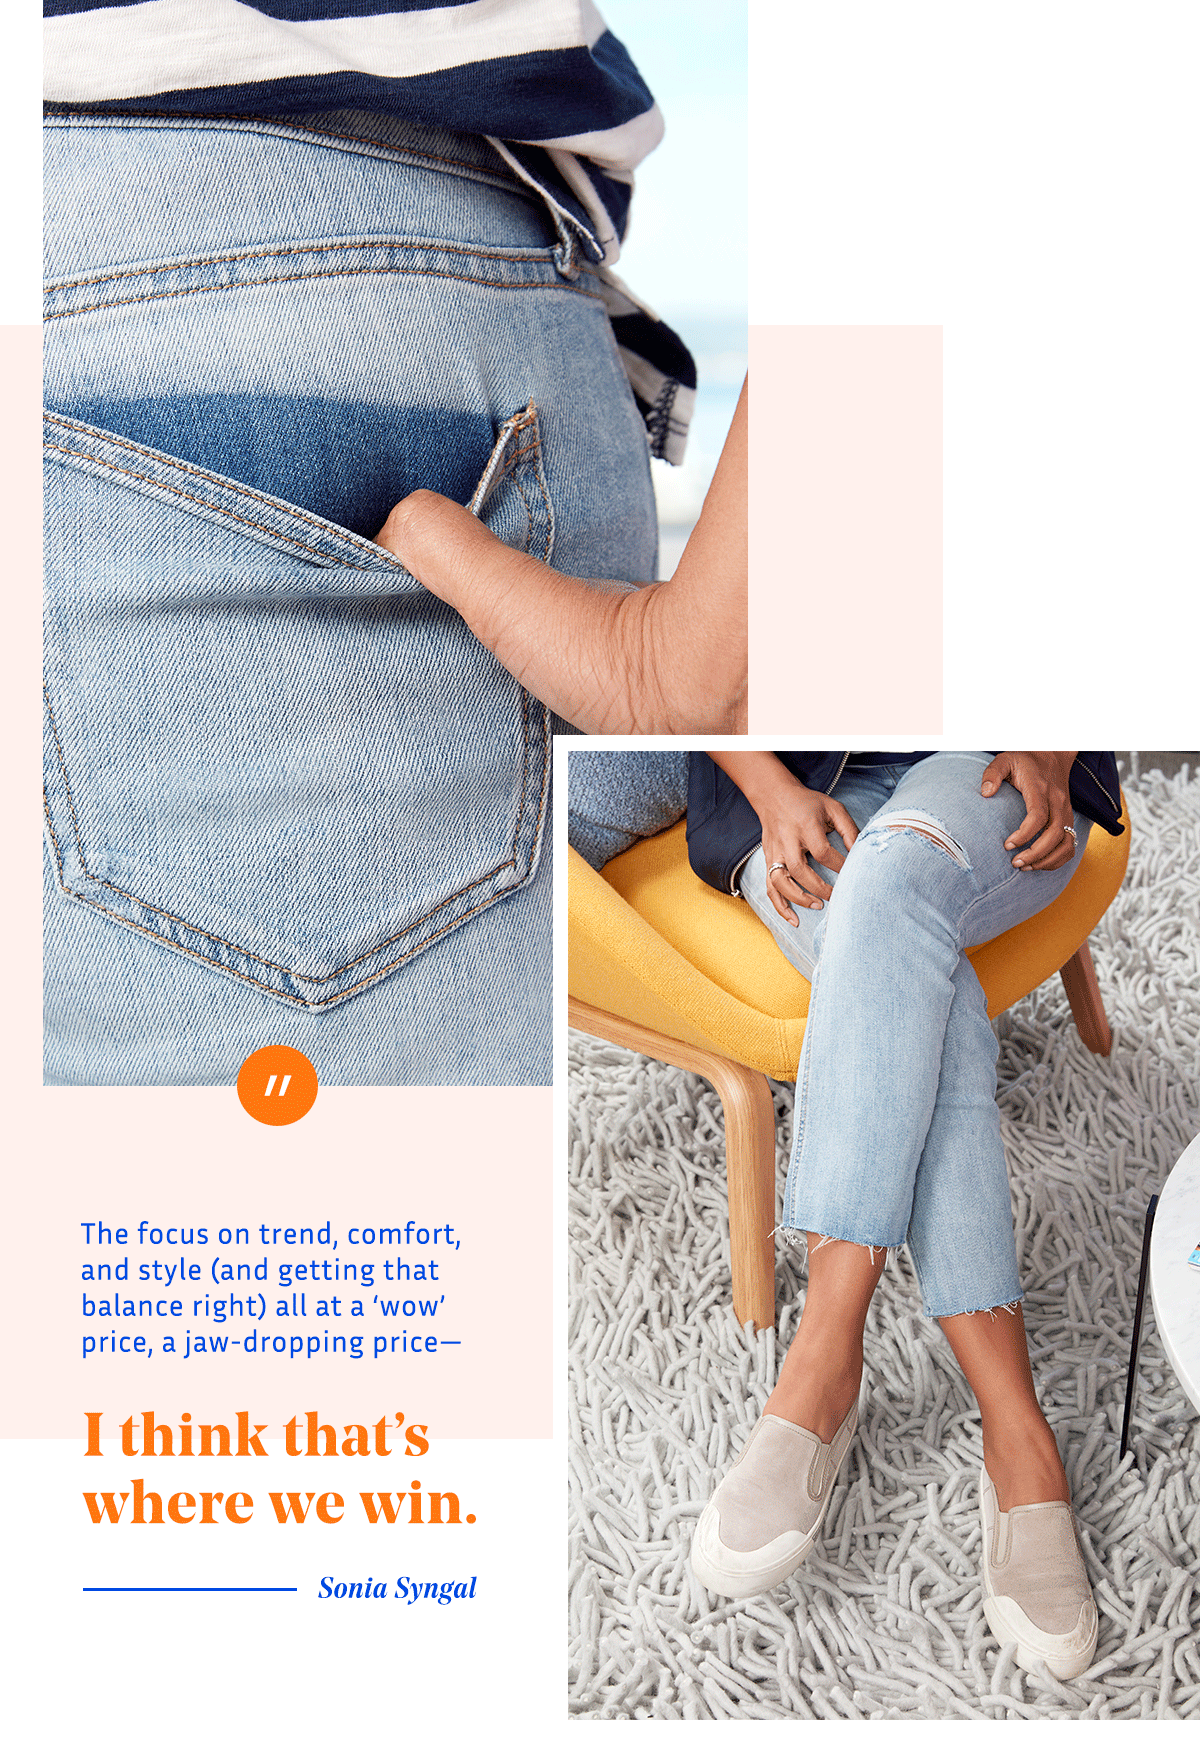 how-to-wear-jeans-at-work-248847-1519151851522-main